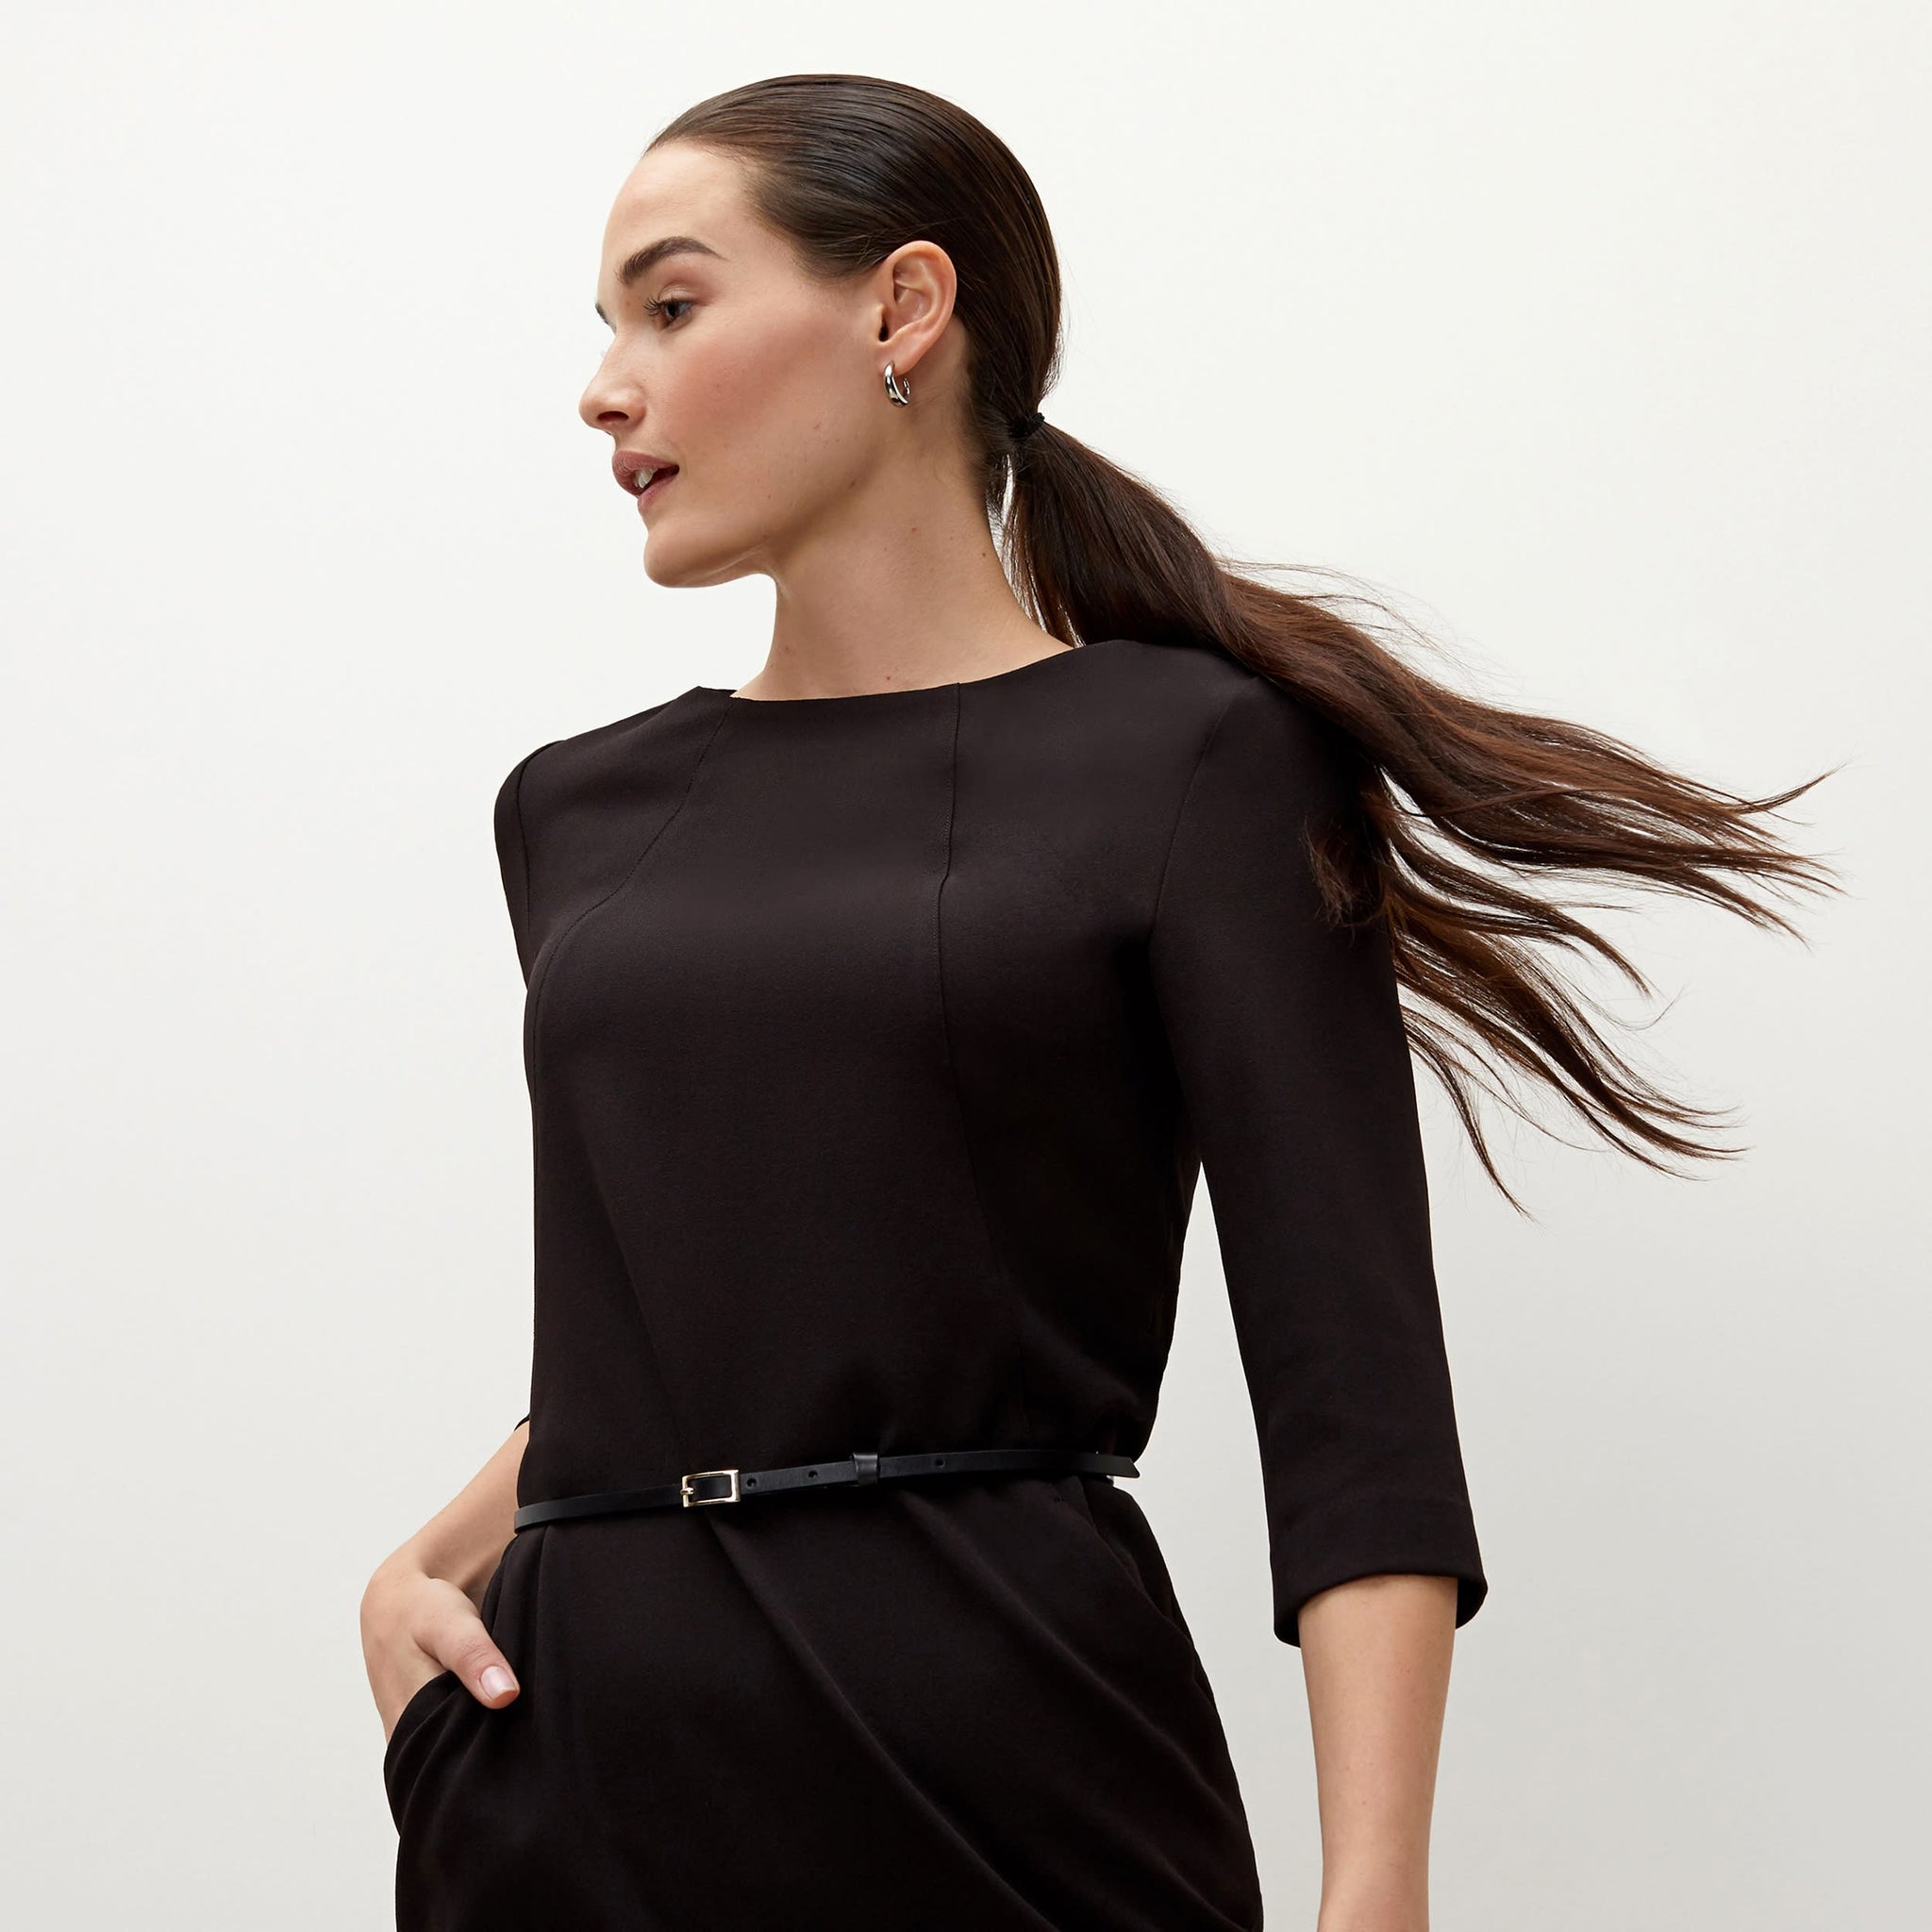 Detail image of a woman standing wearing the Etsuko dress in black